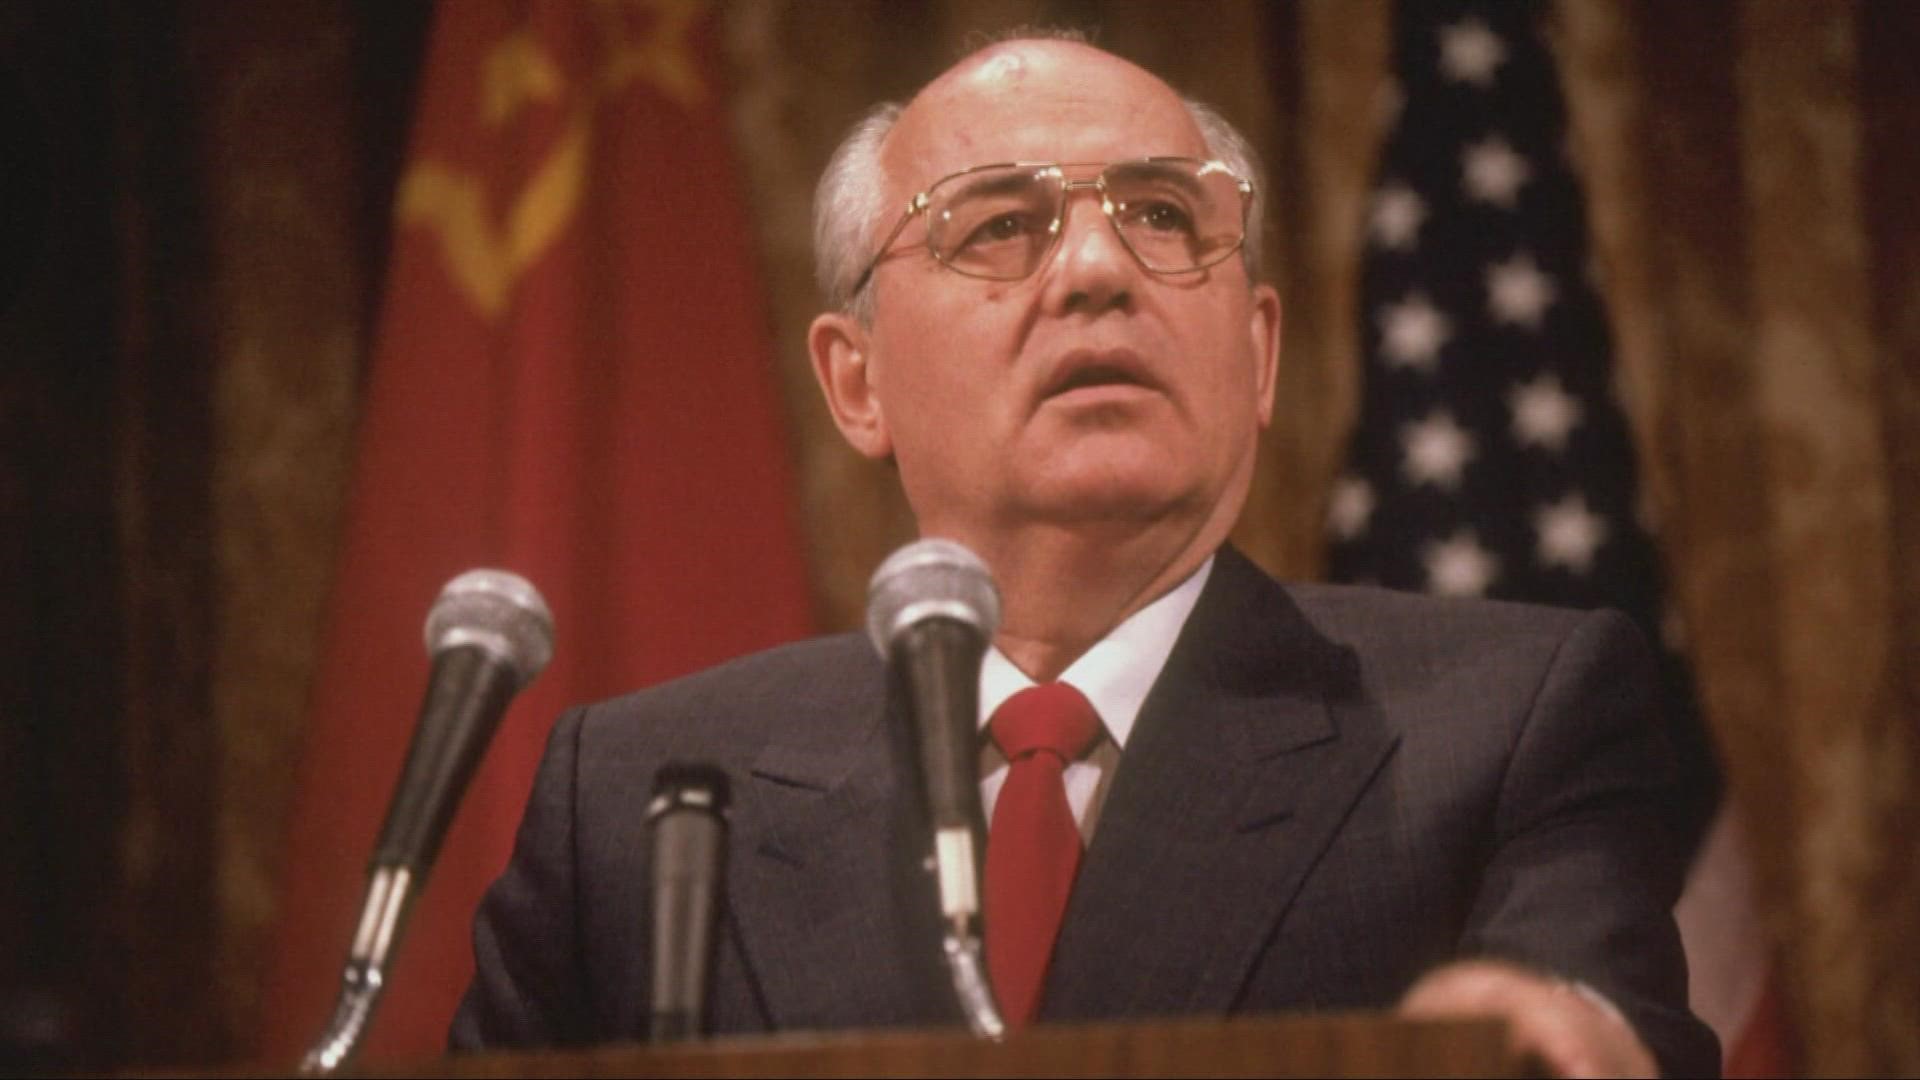 Gorbachev's resignation 30 years ago marked the end of USSR | KPIC